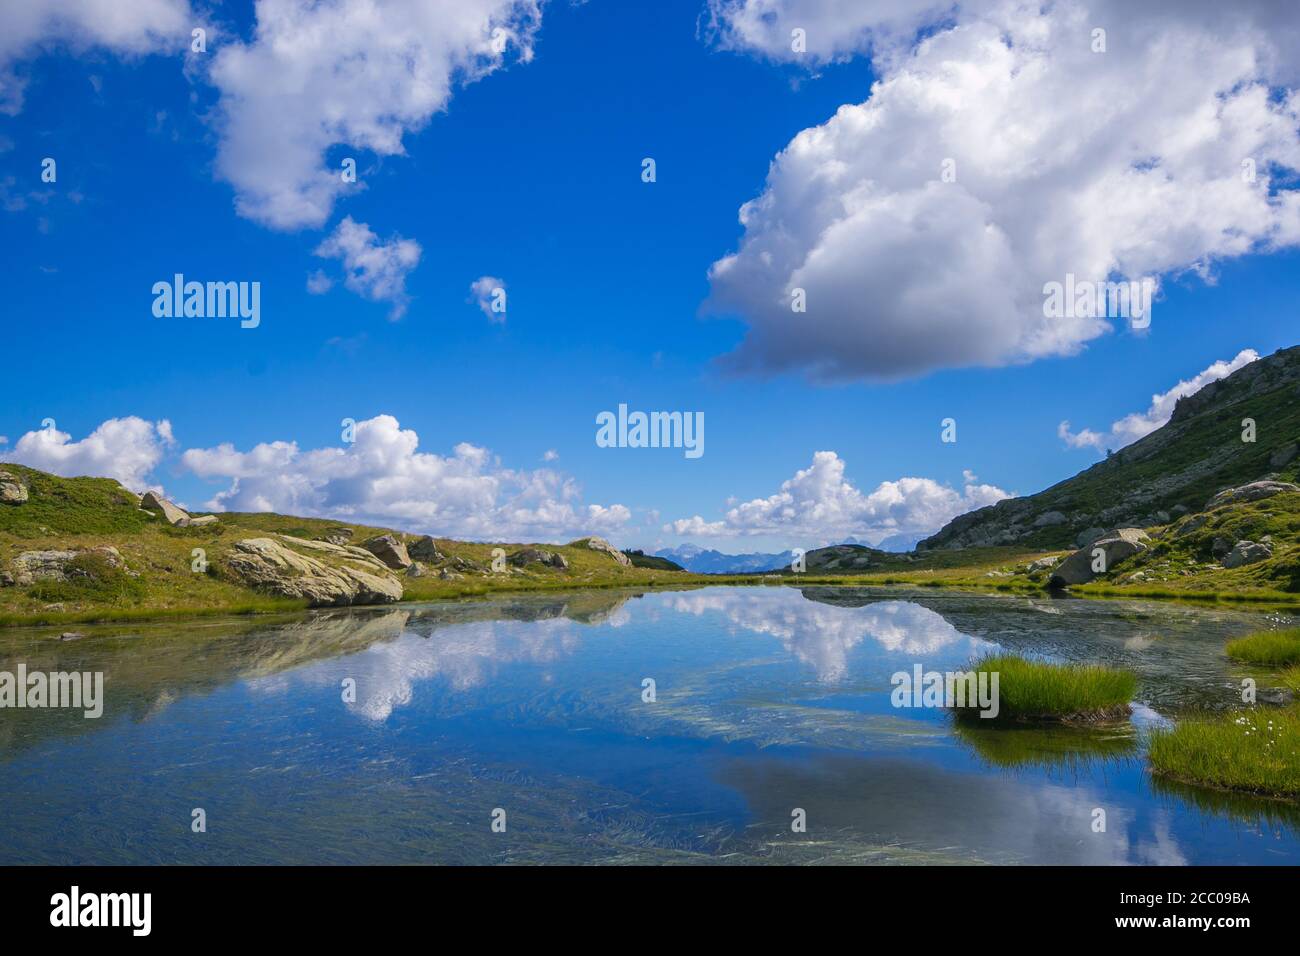 Summer view of Bombasel lakes in Cermis alps, Trentino, Italy Stock Photo